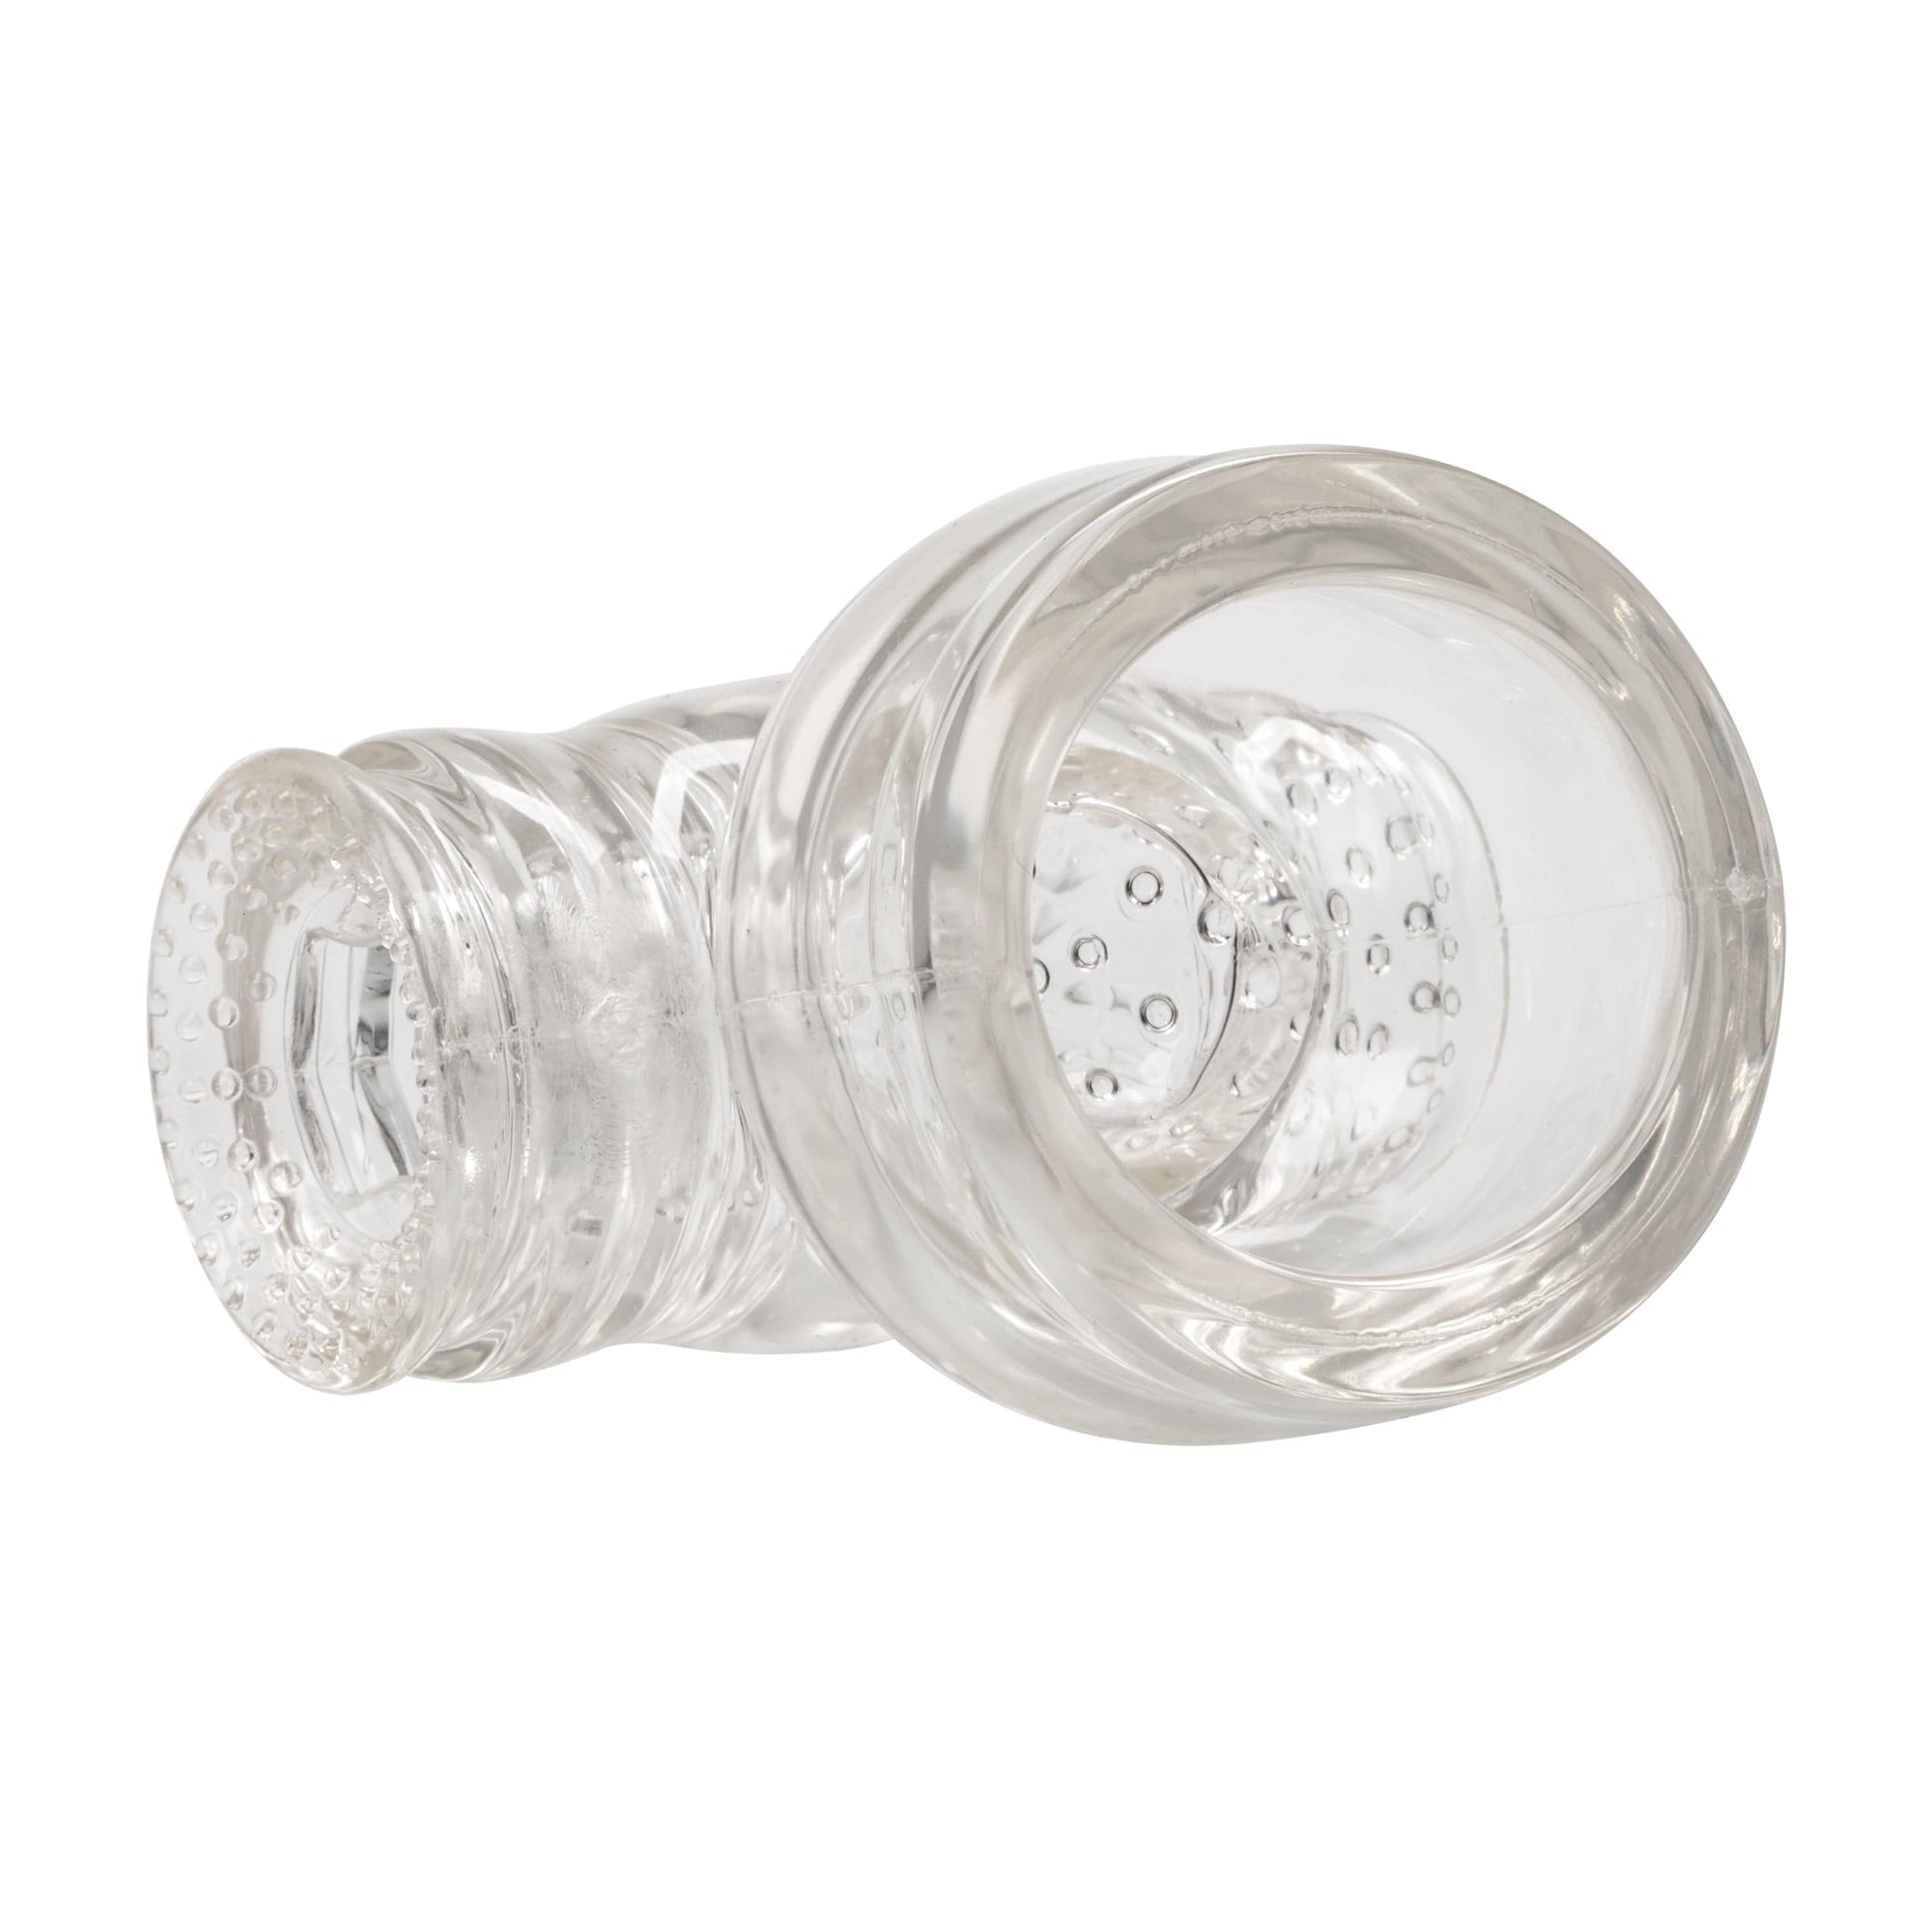 California Exotics - Miracle Massager Accessory For Him (Clear) Accessories 716770052834 CherryAffairs